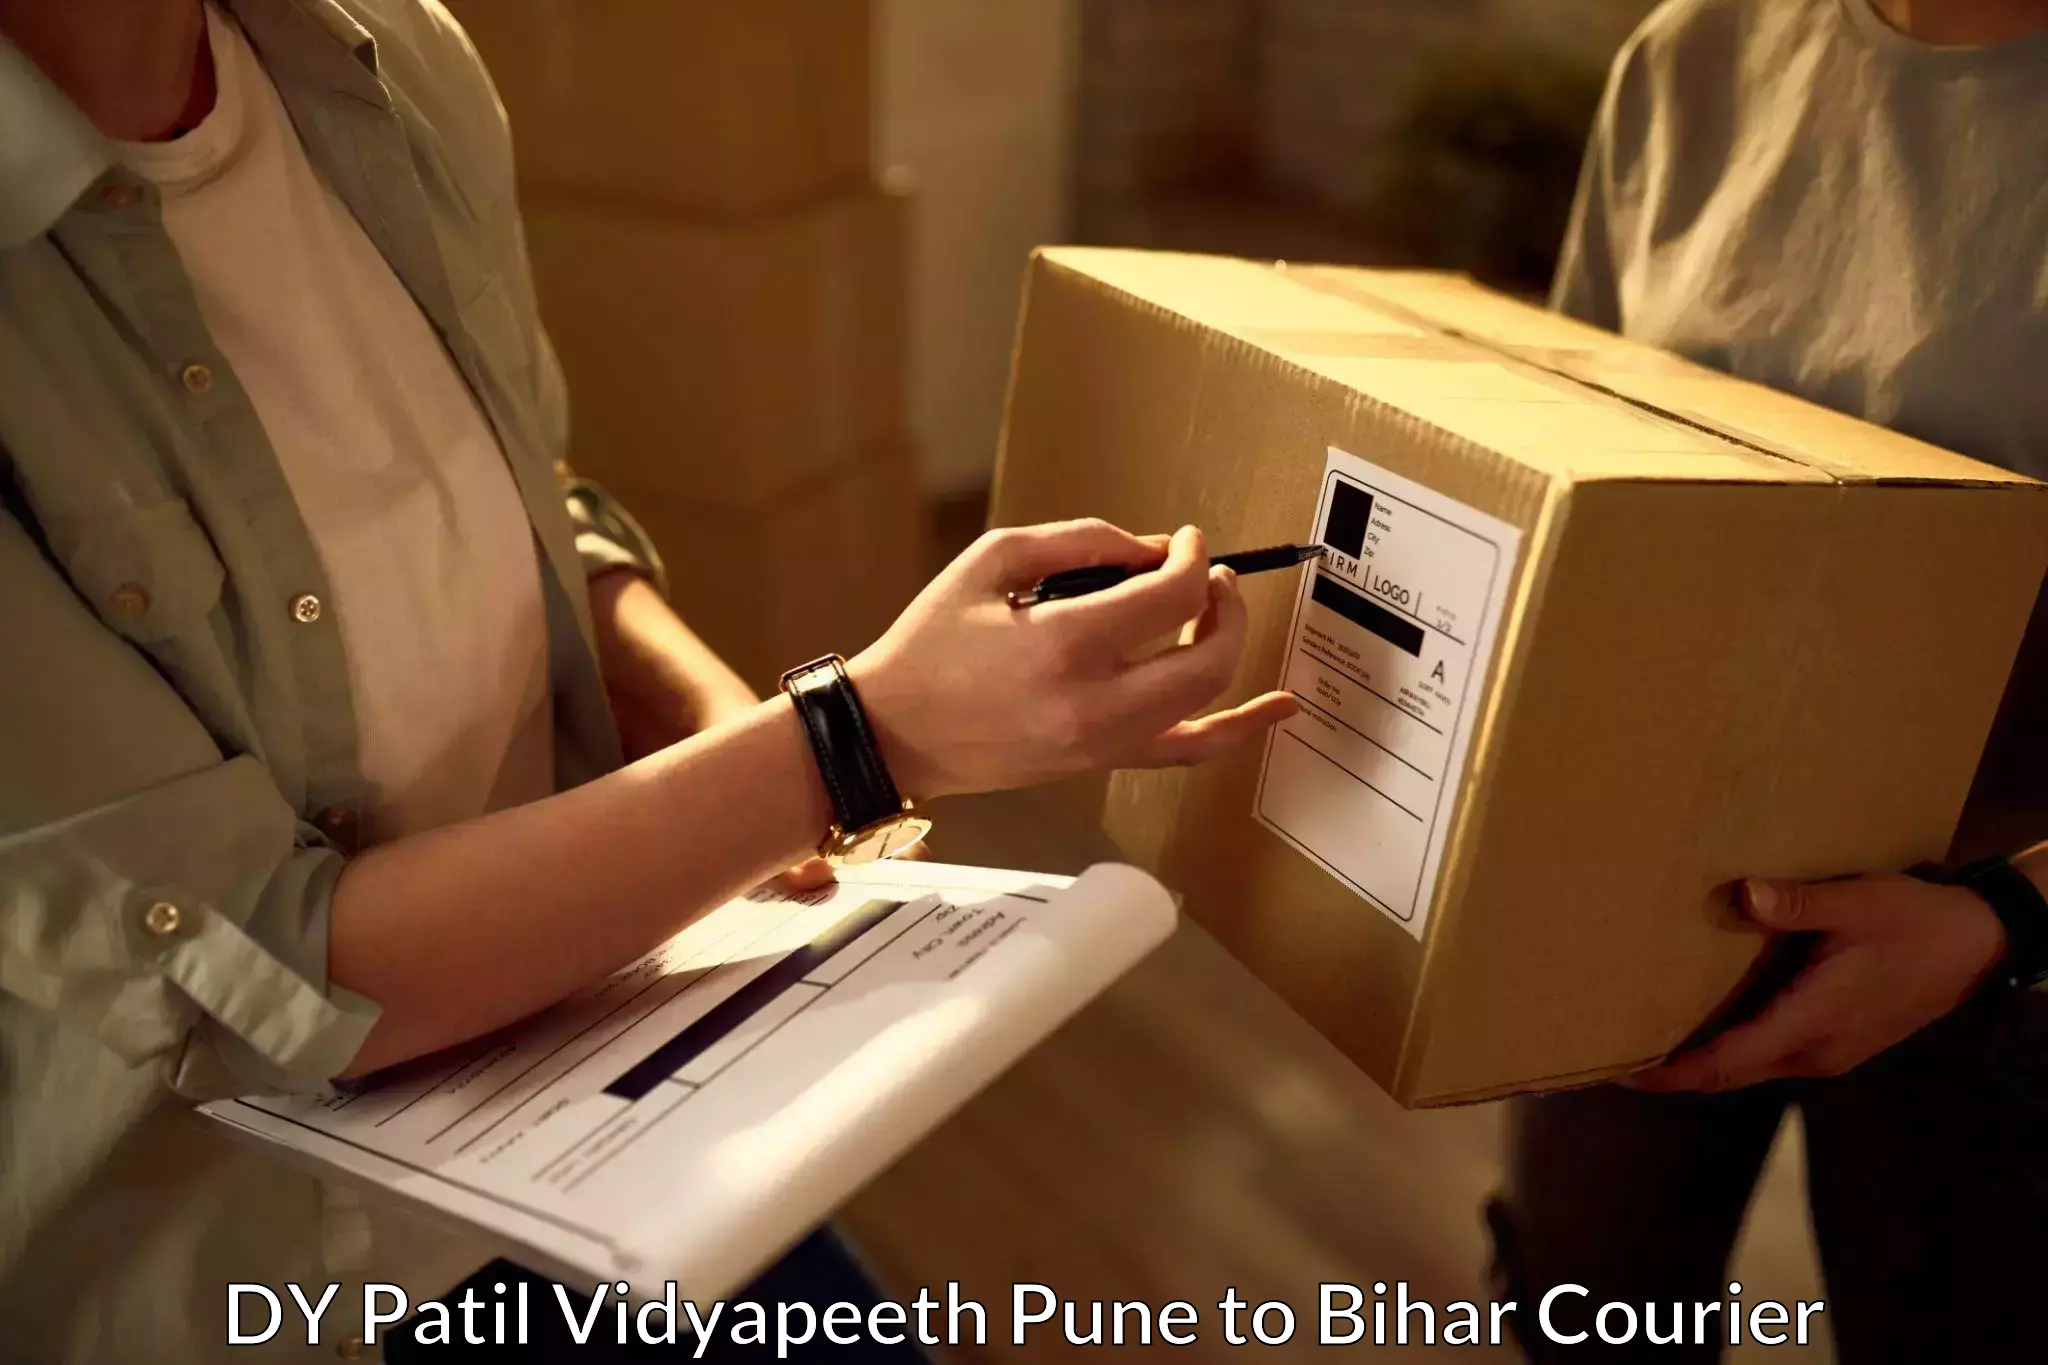 Express mail solutions DY Patil Vidyapeeth Pune to Biraul